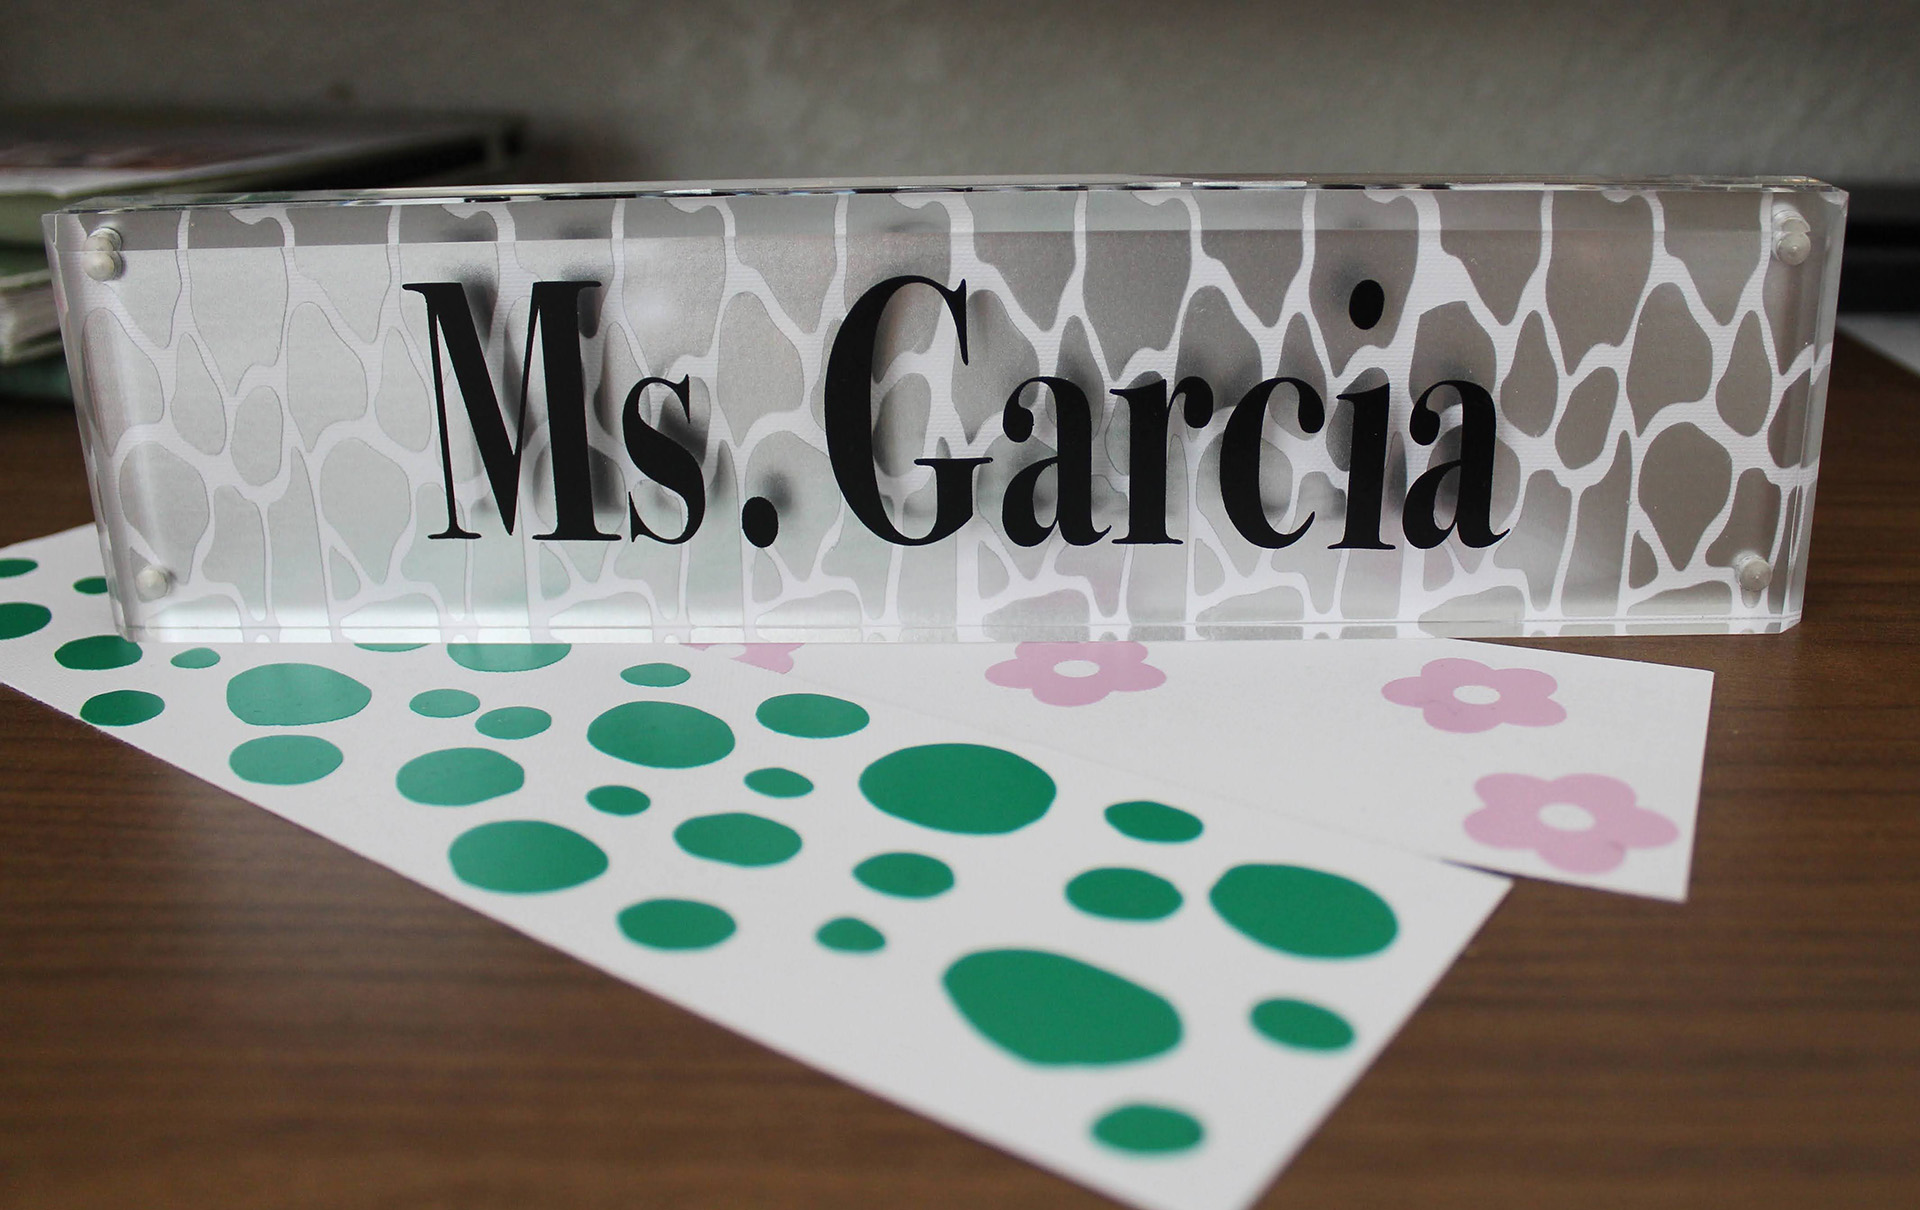 Cricut-made gifts for your college town “family”